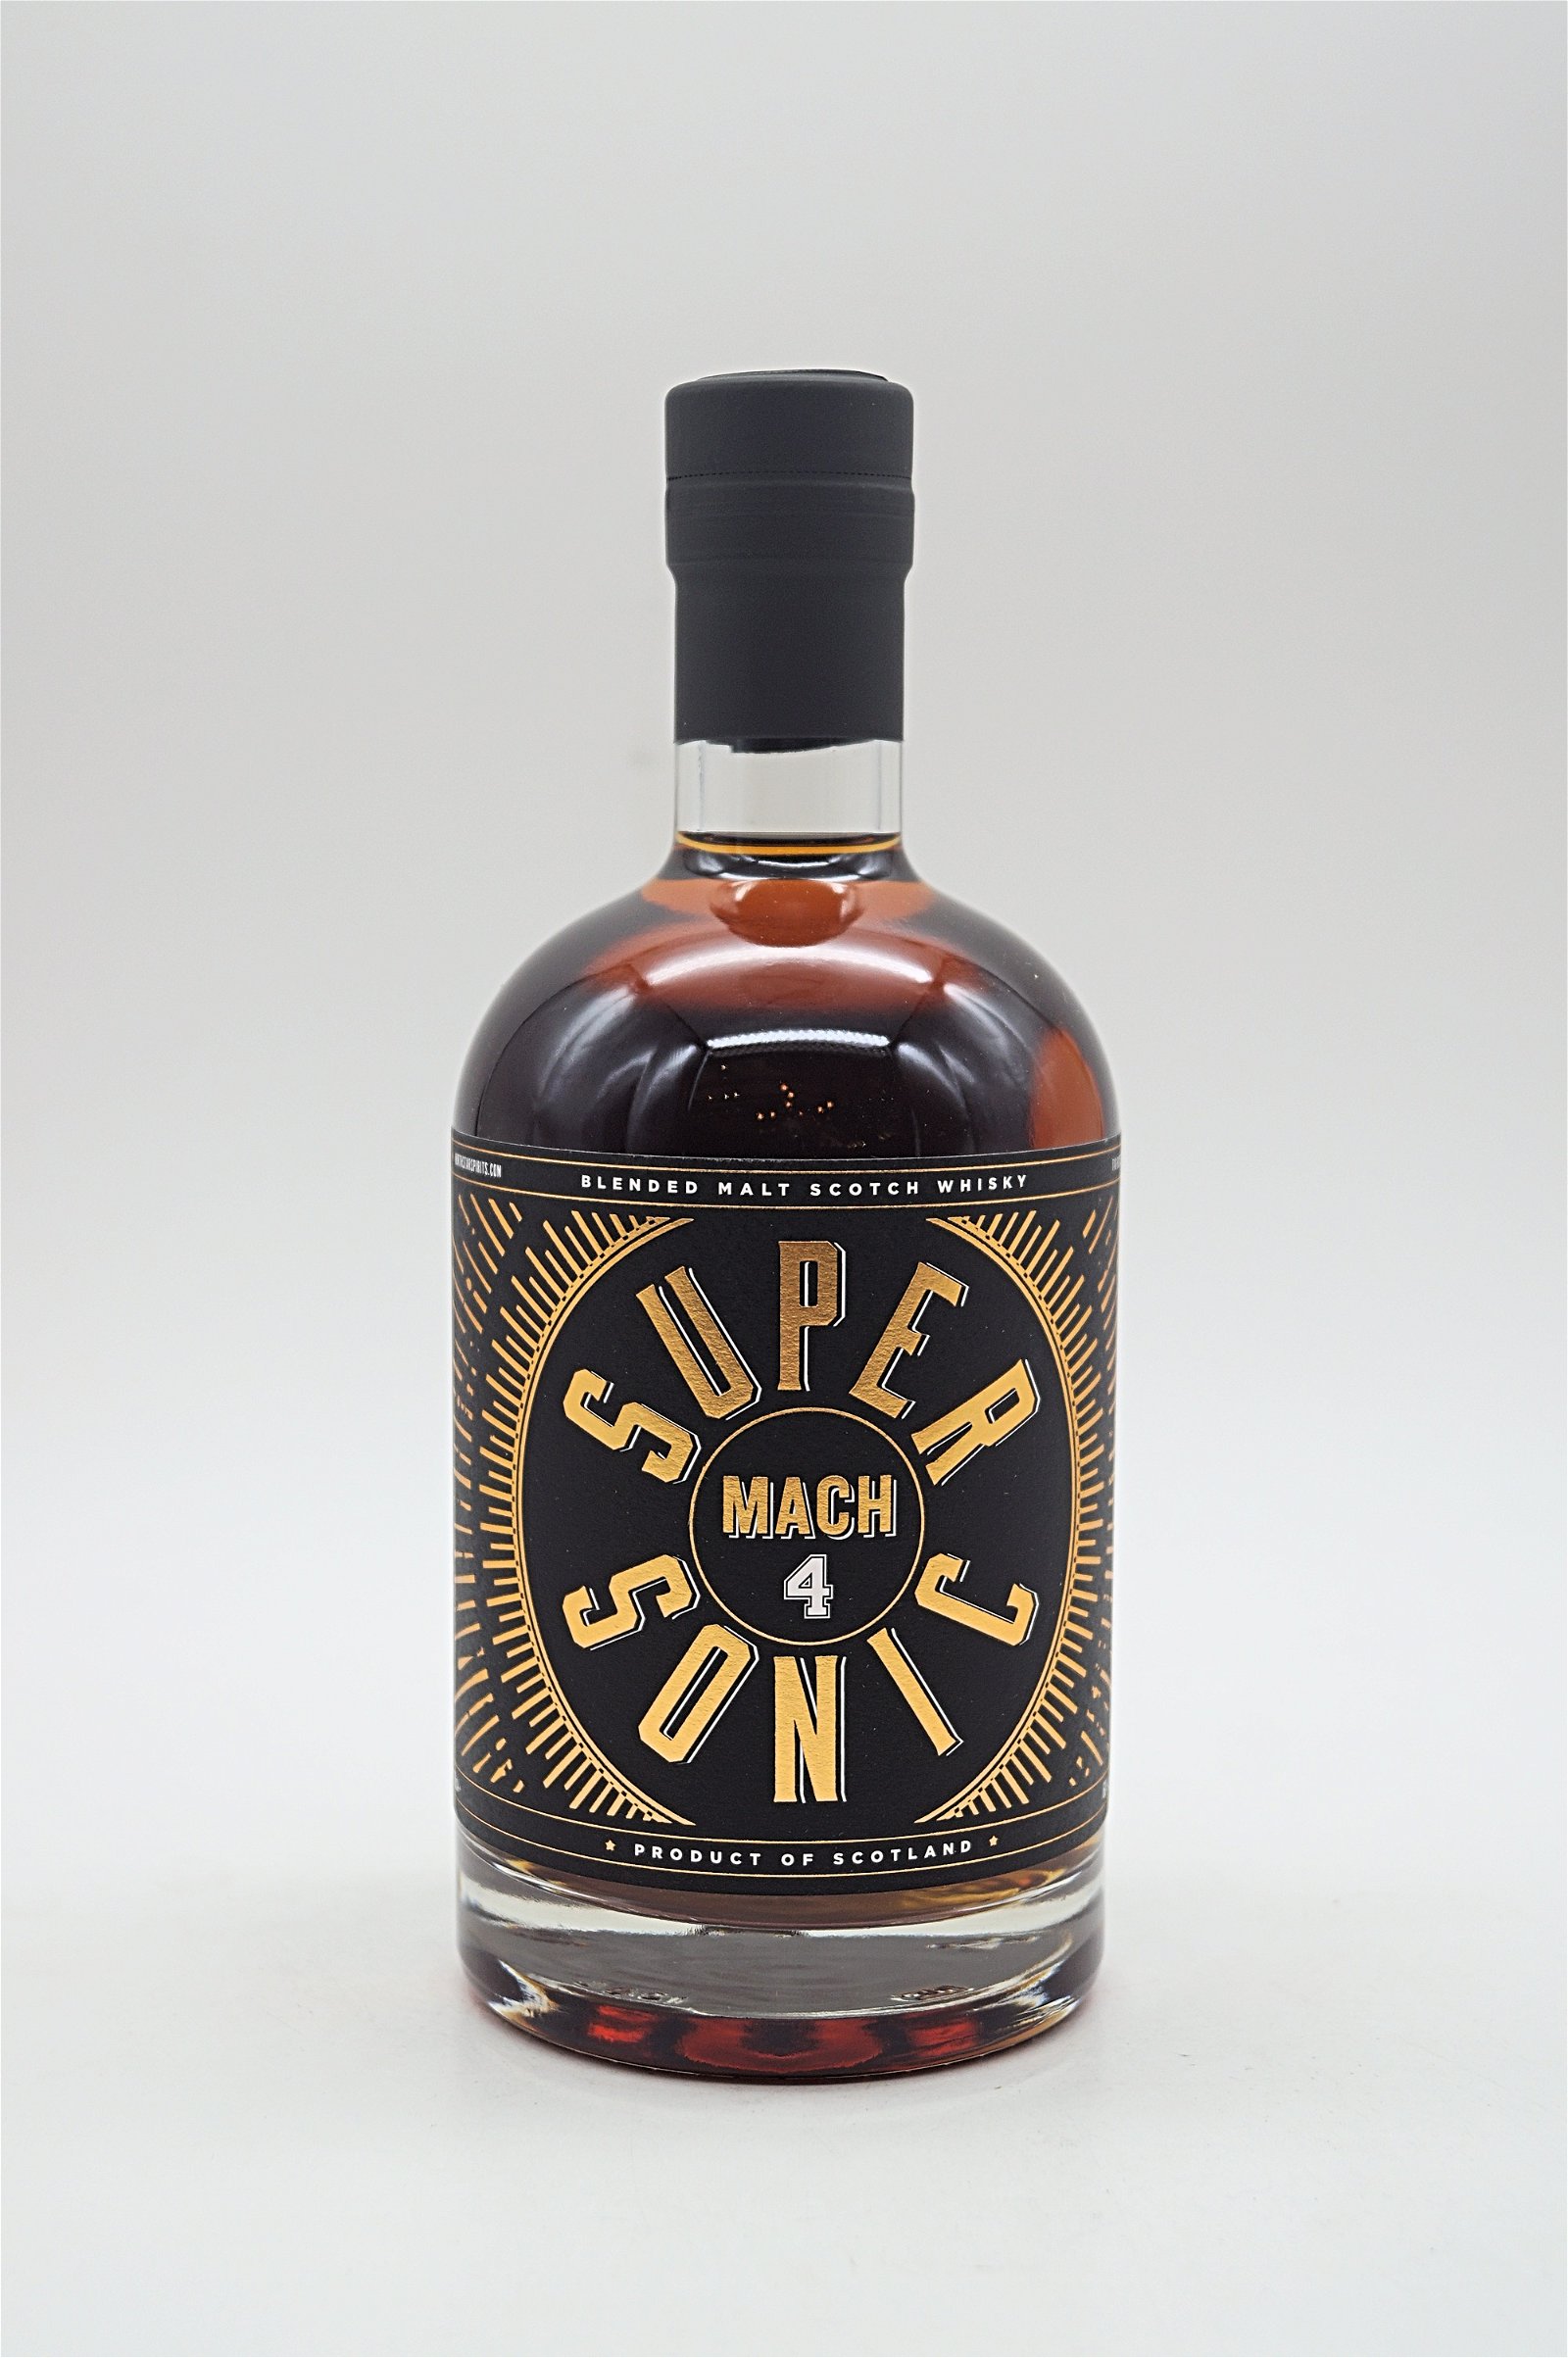 North Star Supersonic Limited Edition Mach 4 Blended Malt Scotch Whisky